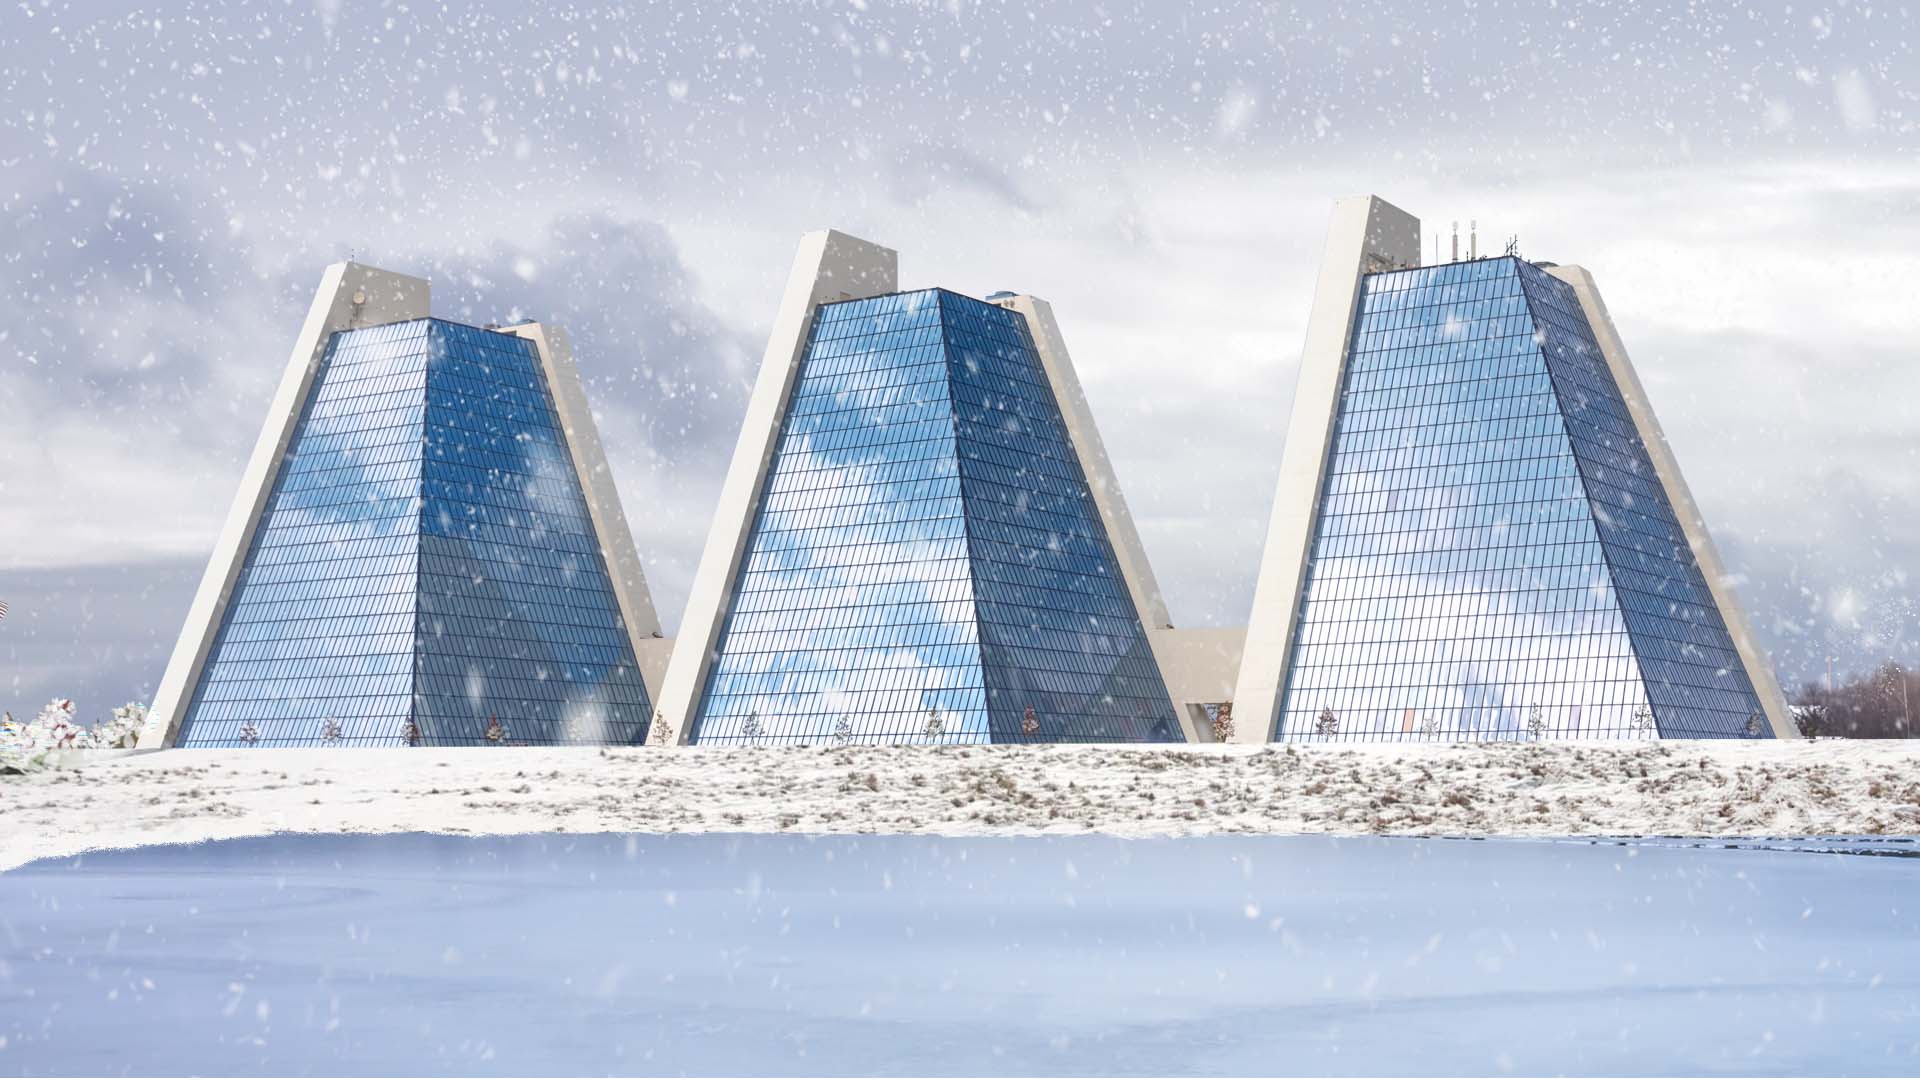 Winter at the Pyramids Photo Contest